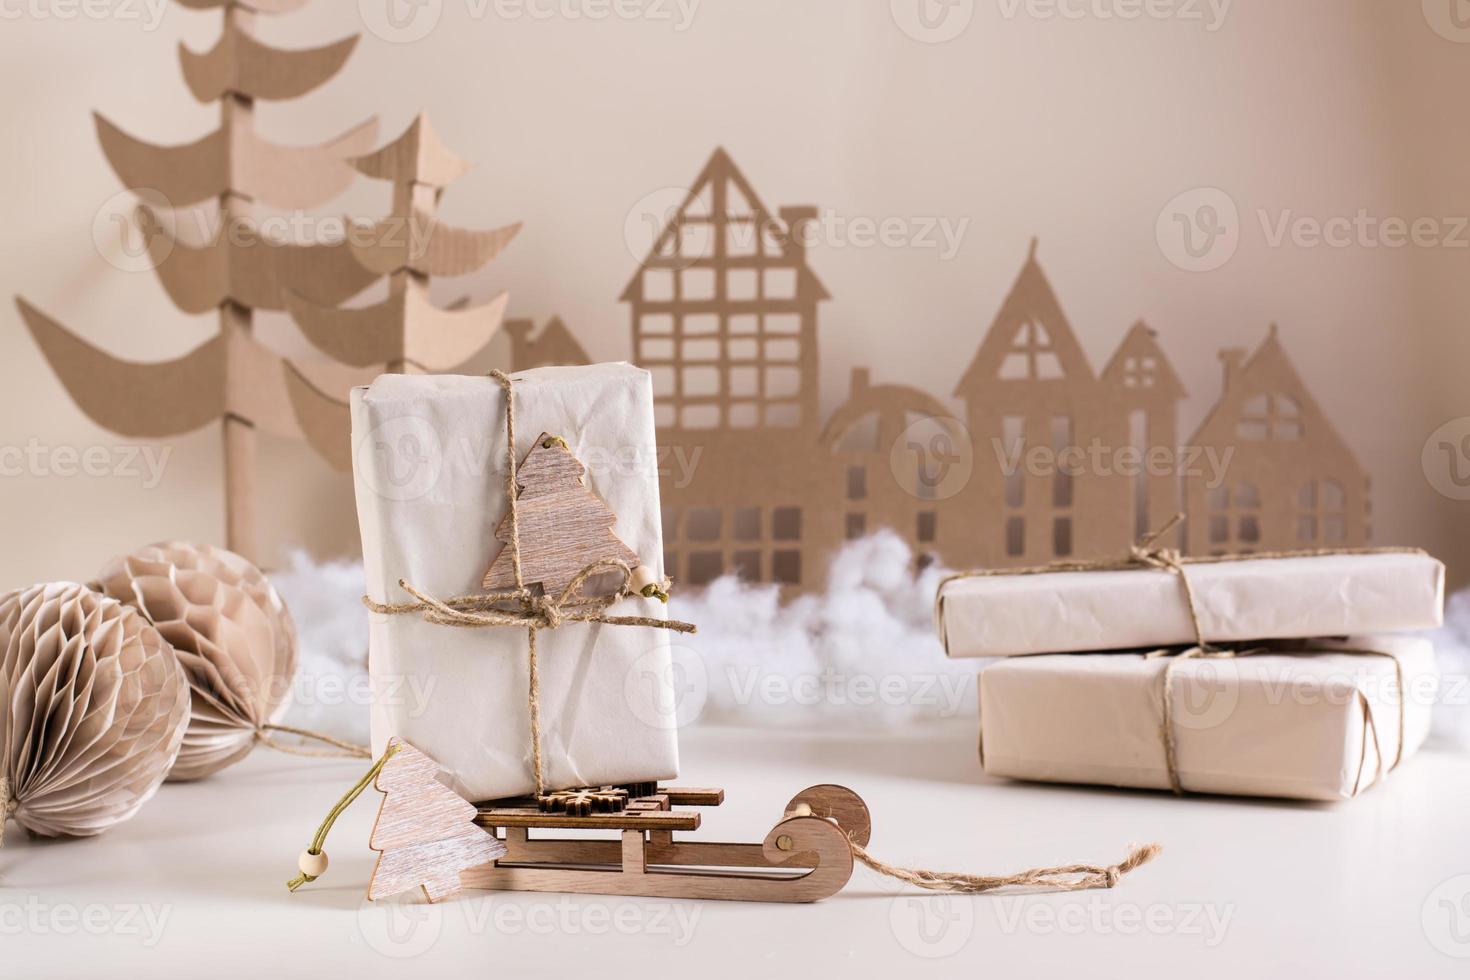 DIY Christmas Home Decor - Paper Ball On Sledge, Craft Paper Gifts,  Cardboard Tree And House. Stock Photo, Picture and Royalty Free Image.  Image 193763851.